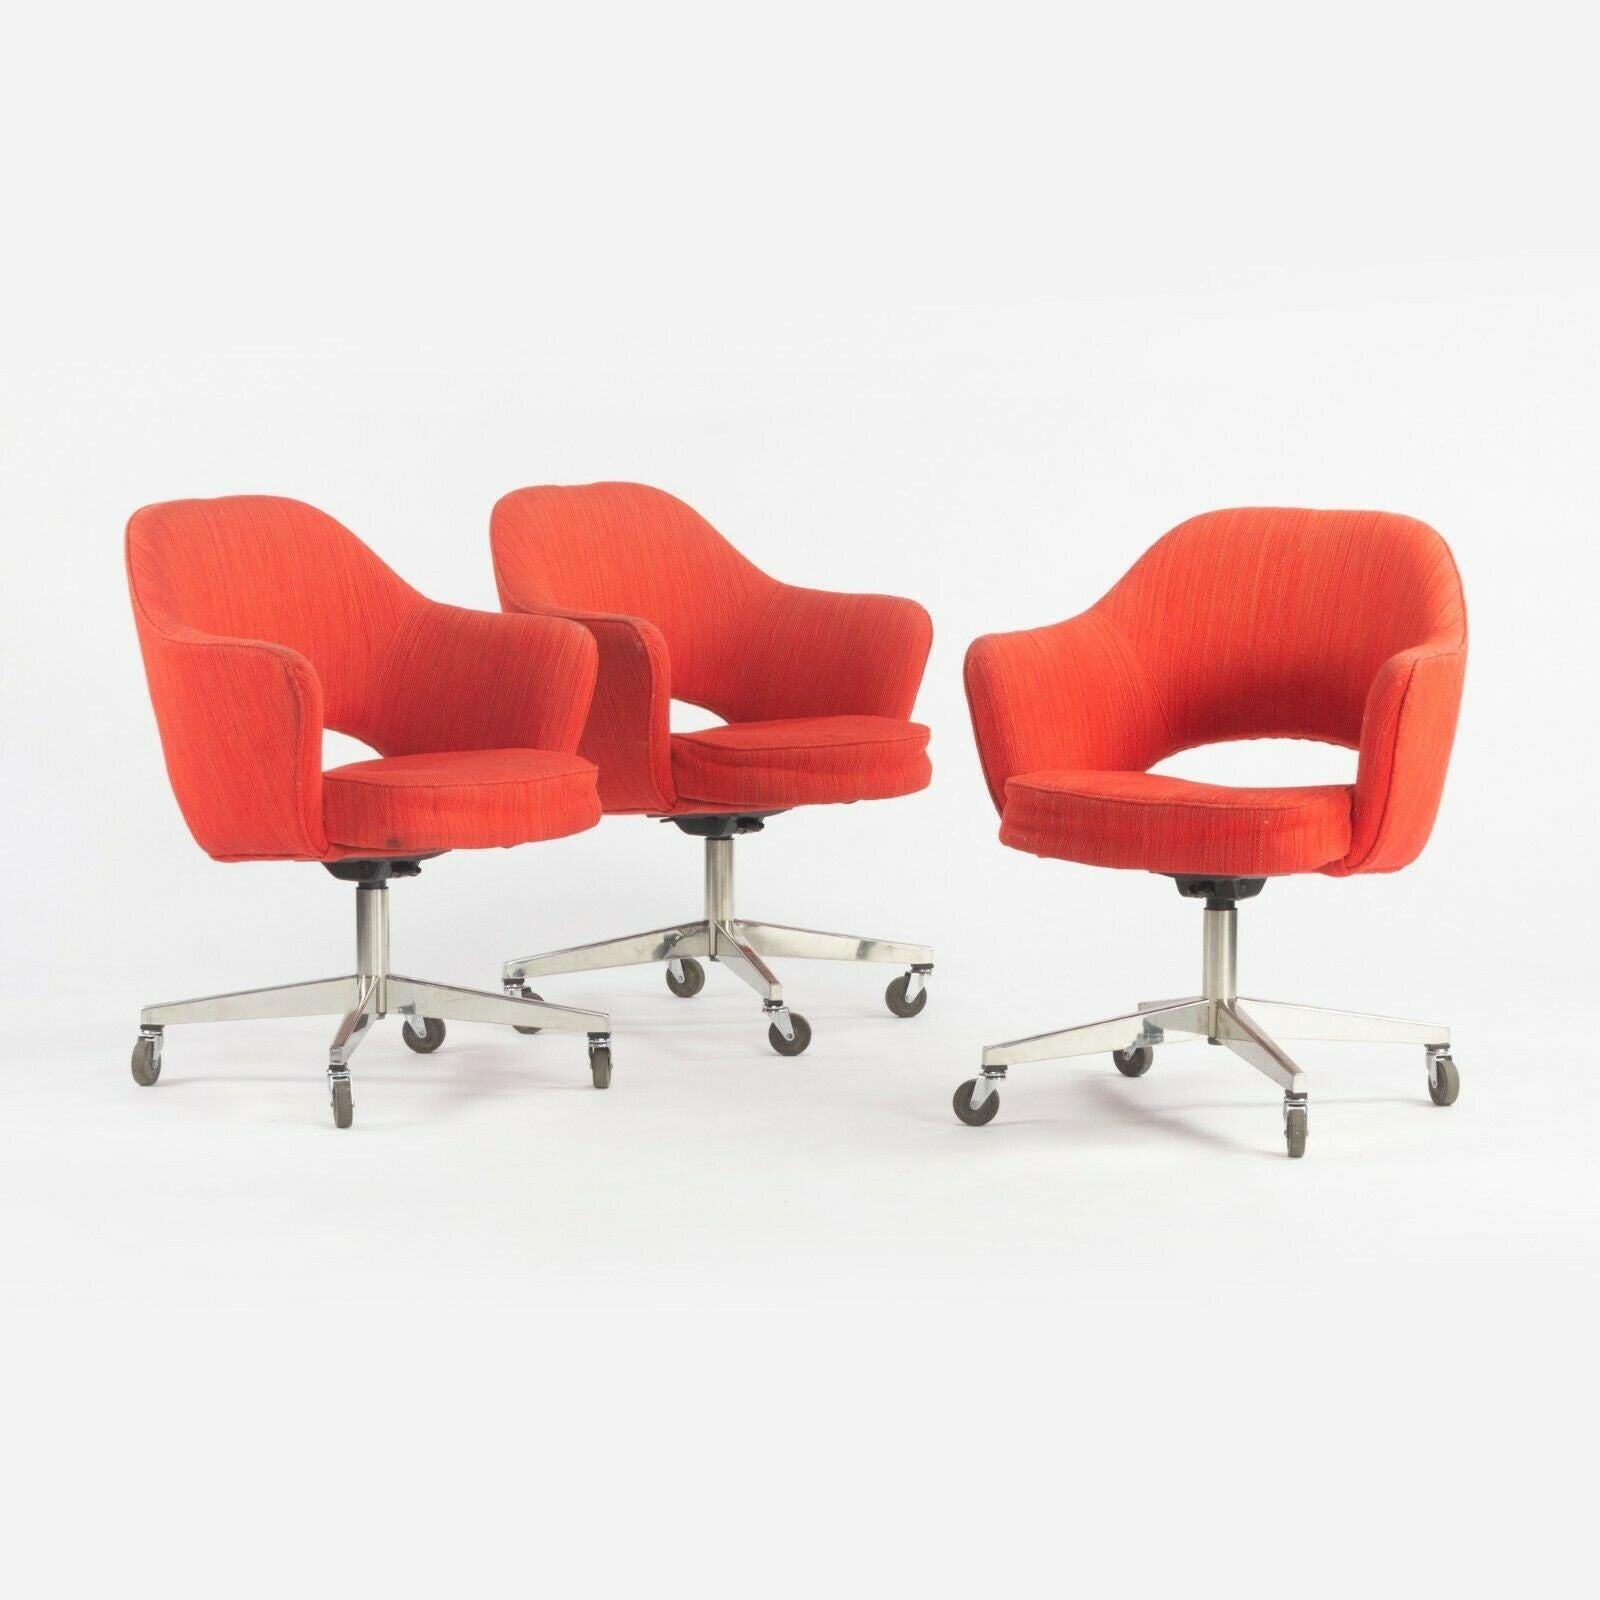 Listed for sale is a single (each chair is sold separately, though three are available) Eero Saarinen rolling executive office chair with arms. These are gorgeous and original examples, which are dated 1974 and came from an Ithaca, New York law